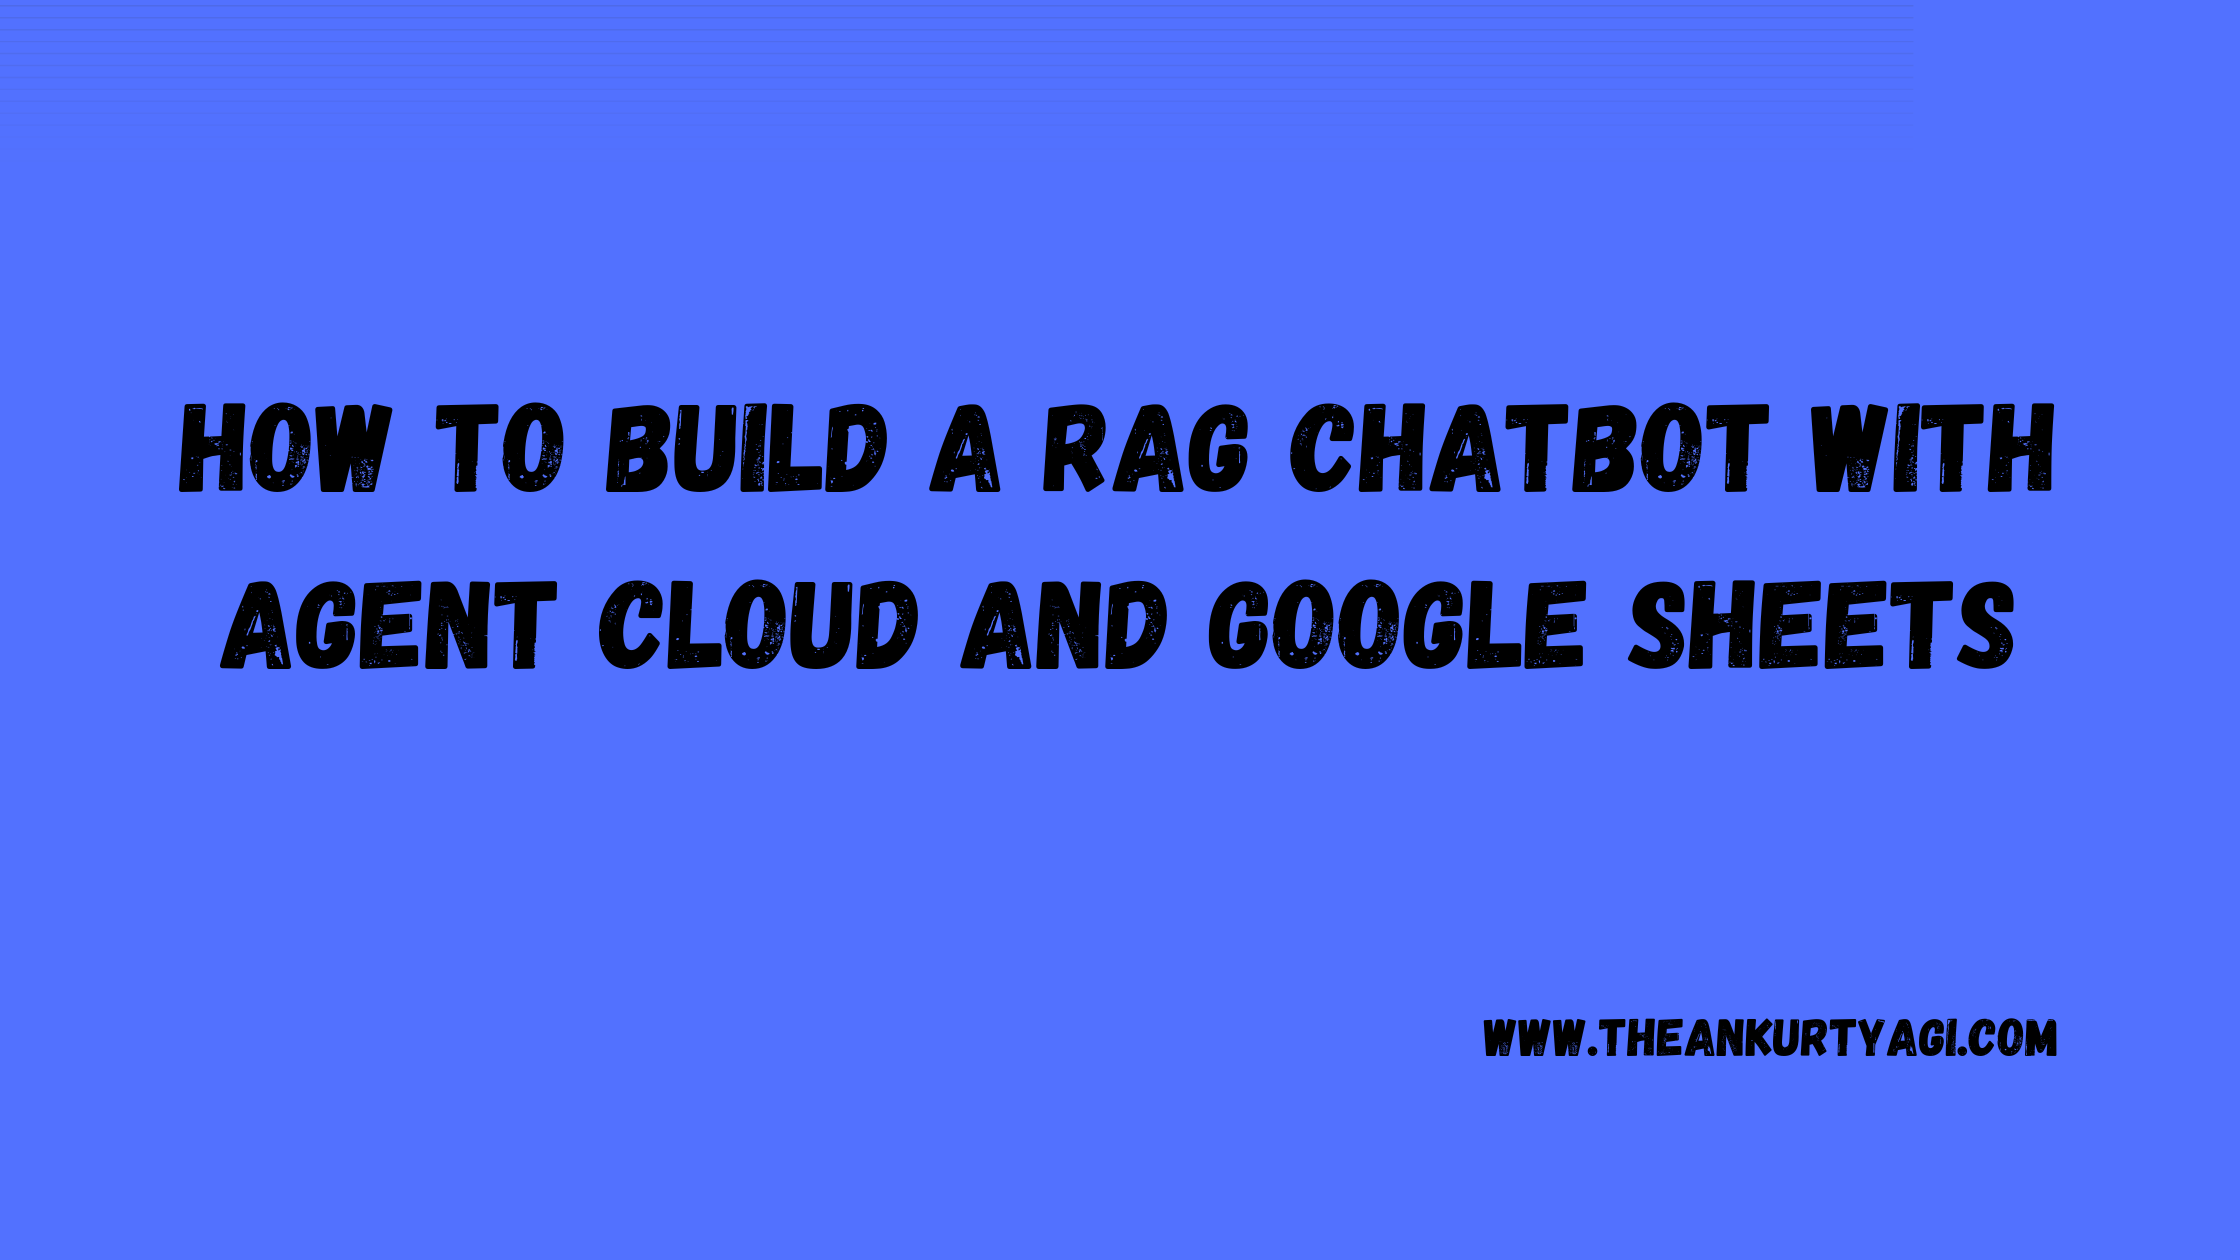 How to Build a RAG Chatbot with Agent Cloud and Google Sheets